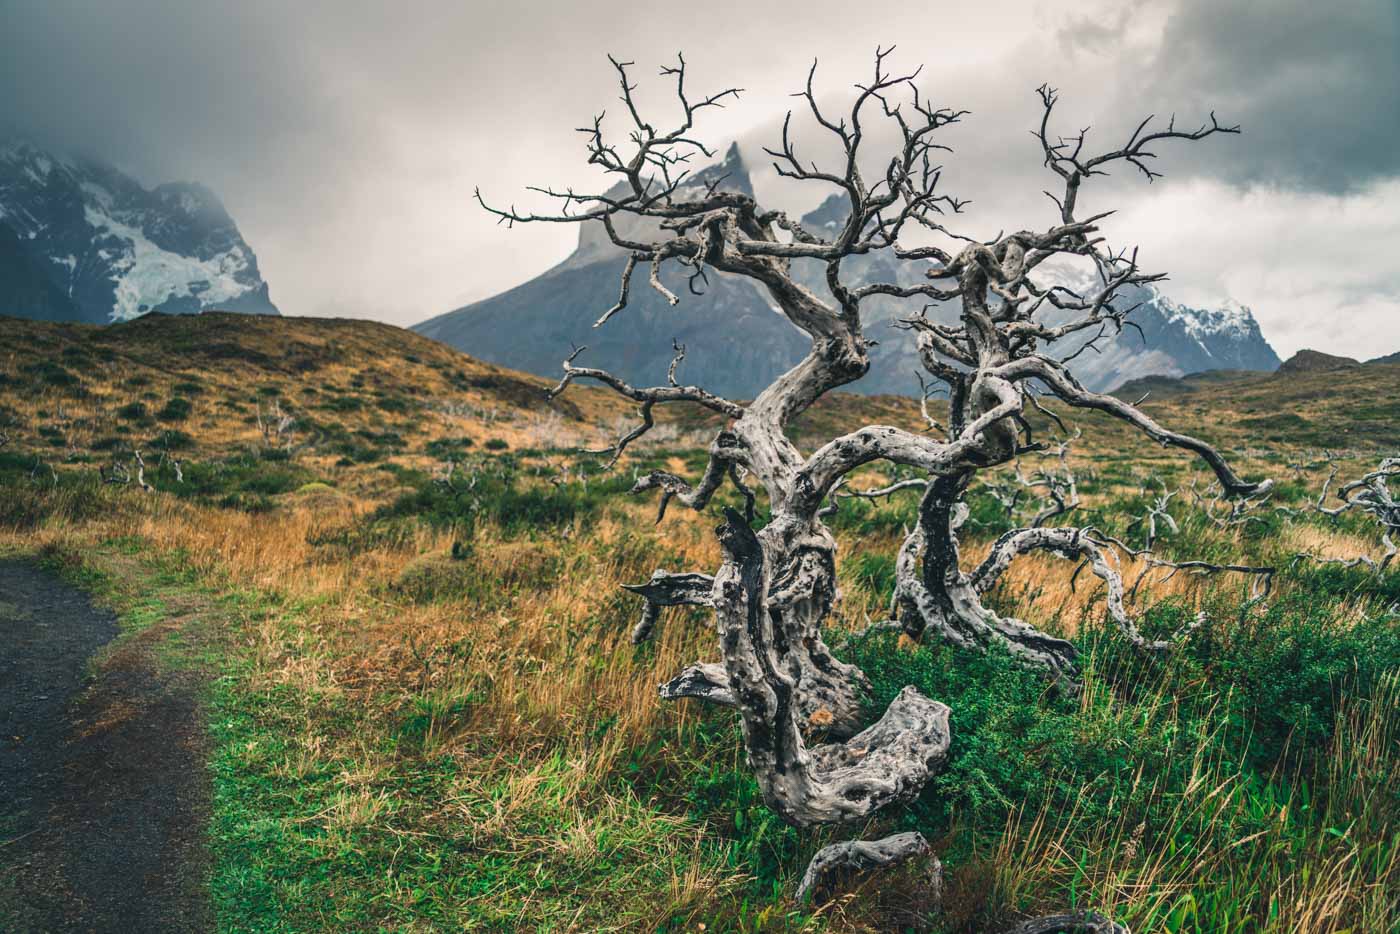 Fire damaged tree in Torres del Paine National Park